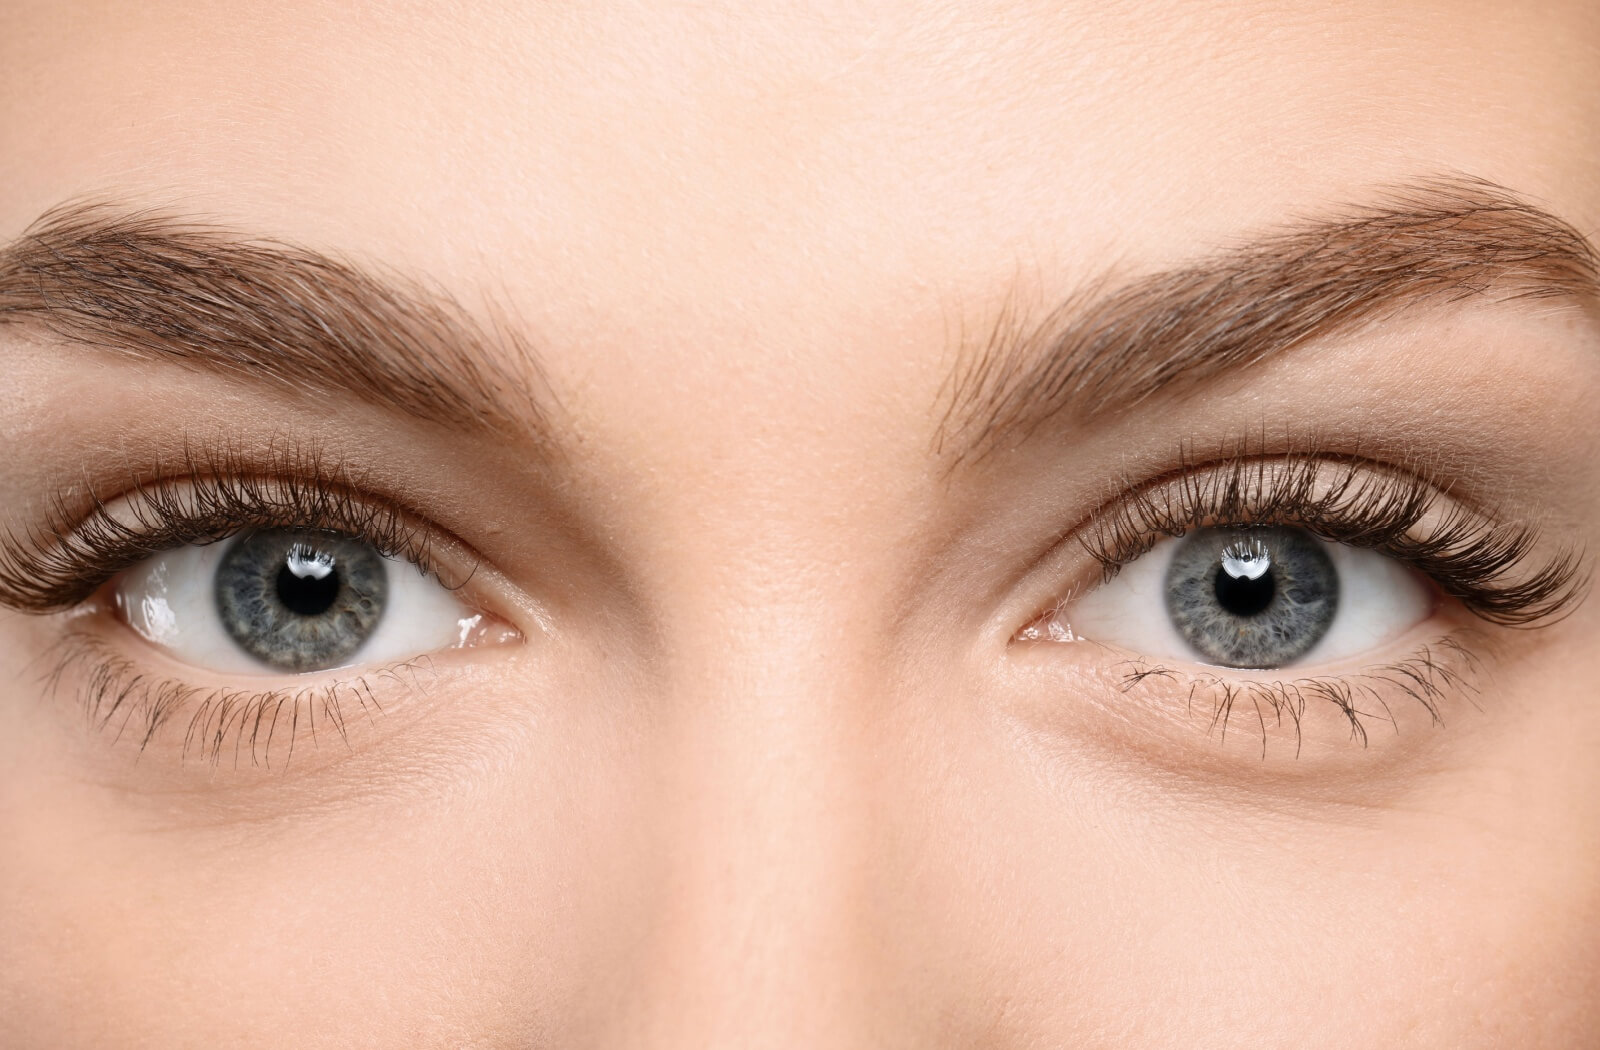 A close-up view of a woman's gray/blue eyes